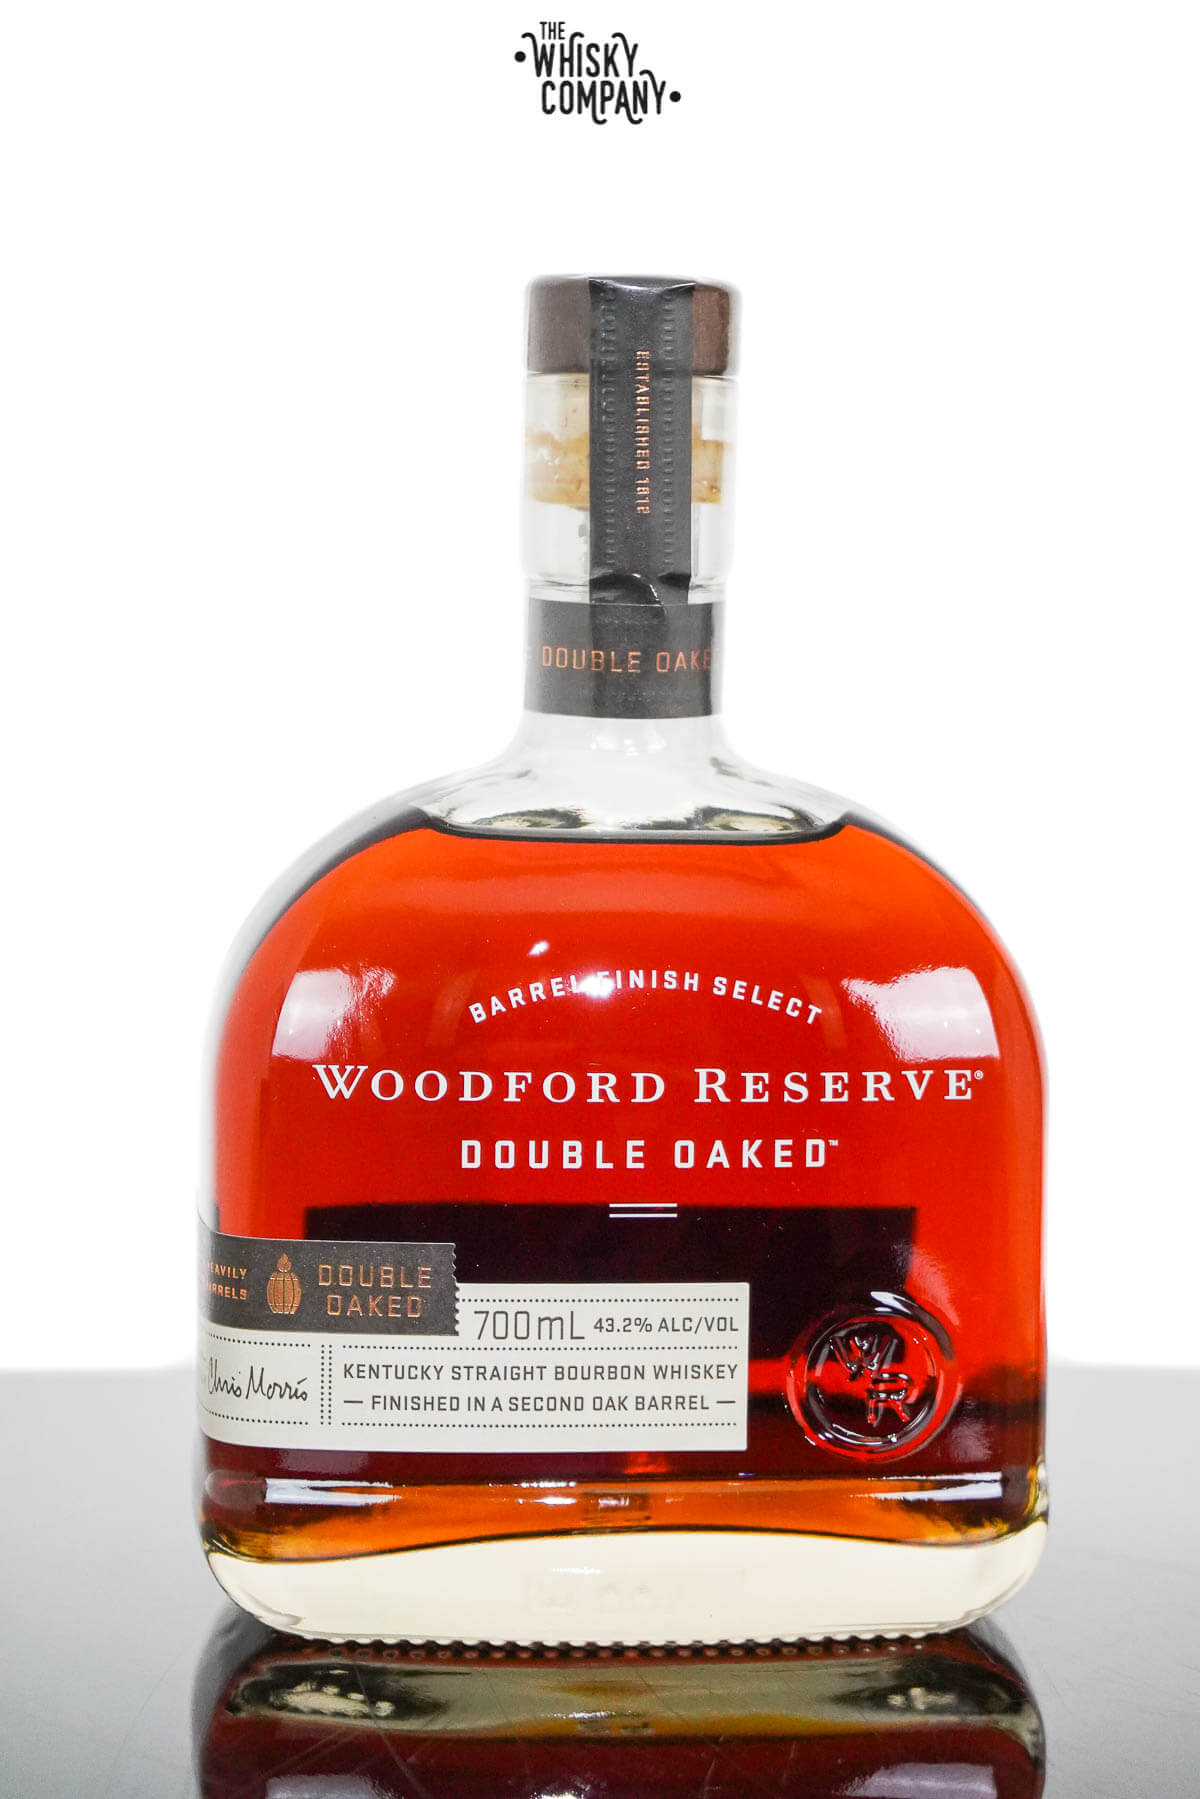 Woodford Reserve Barrel Finish Select Double Oaked